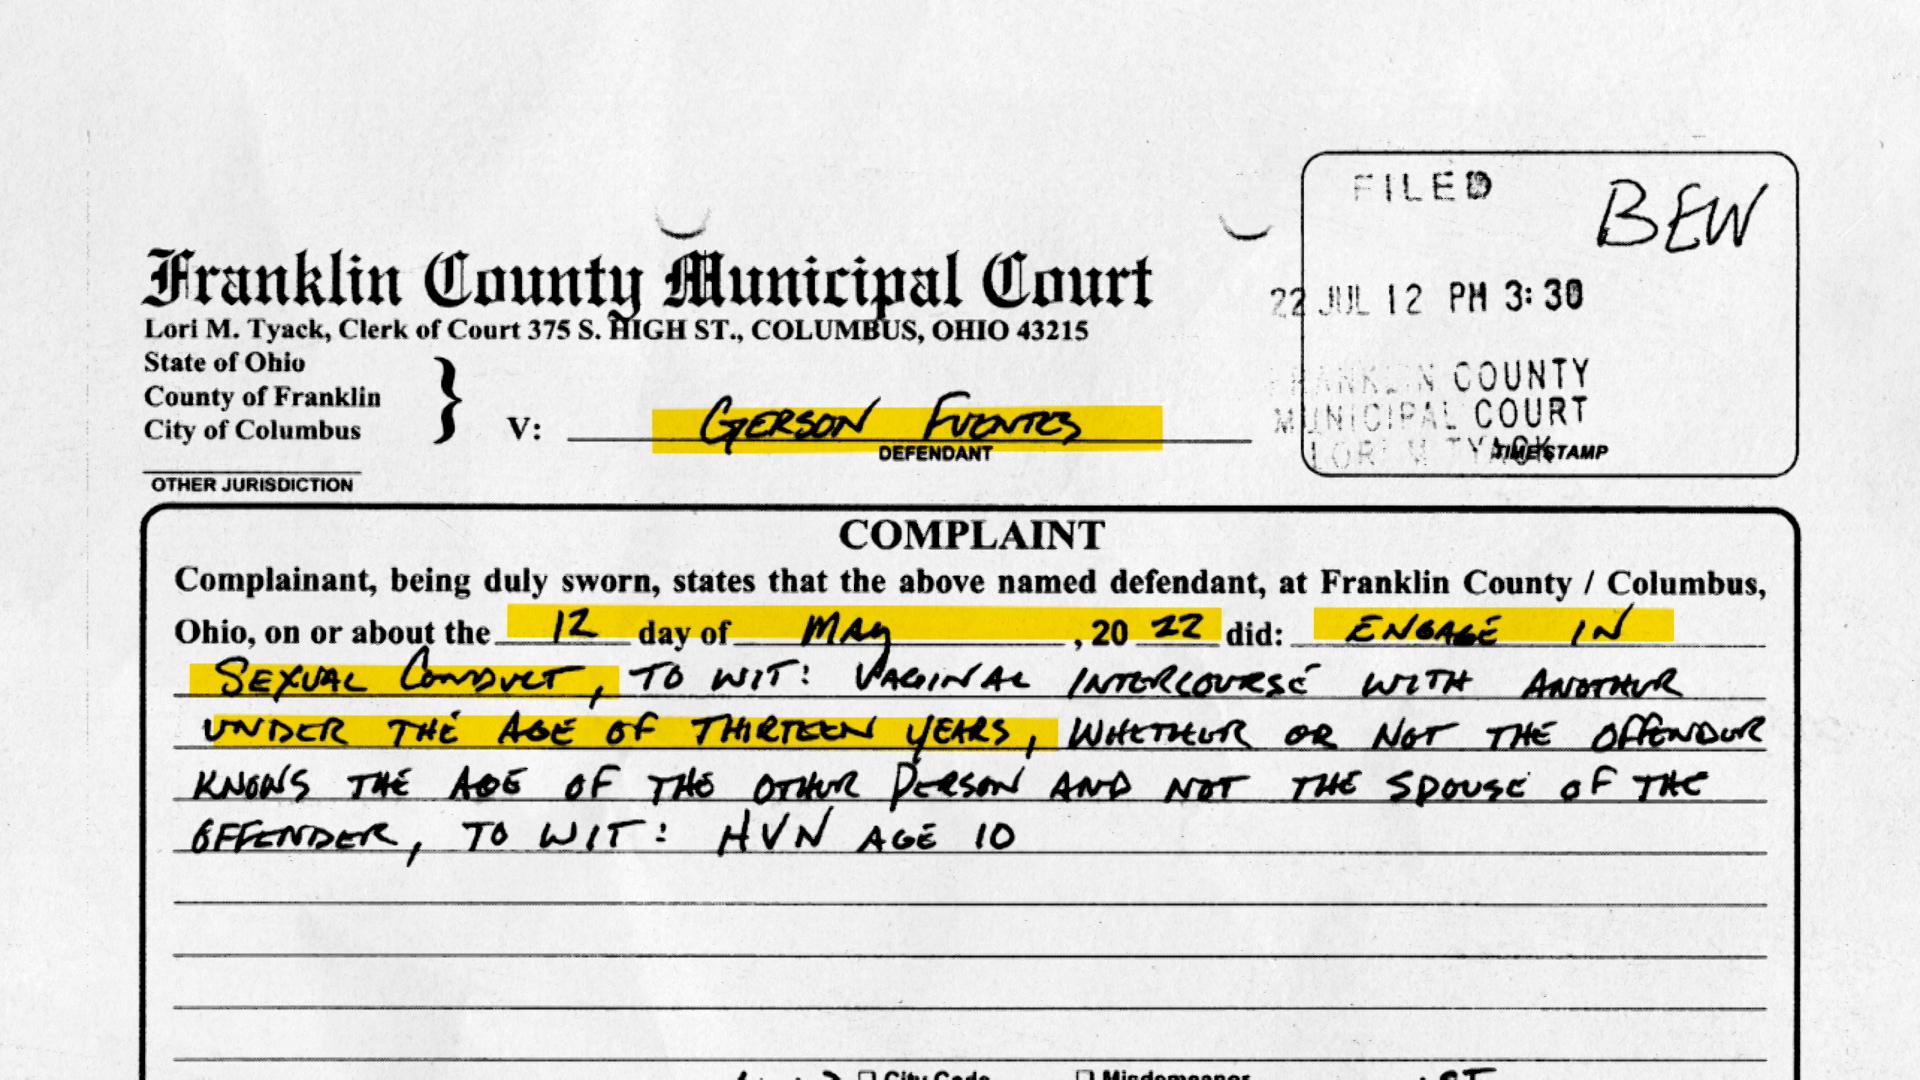 This is an image of Franklin County Municipal Court case. The document details the case Fuentes V Columbus and the coverage of a 10-year-old's abortion in Indiana.